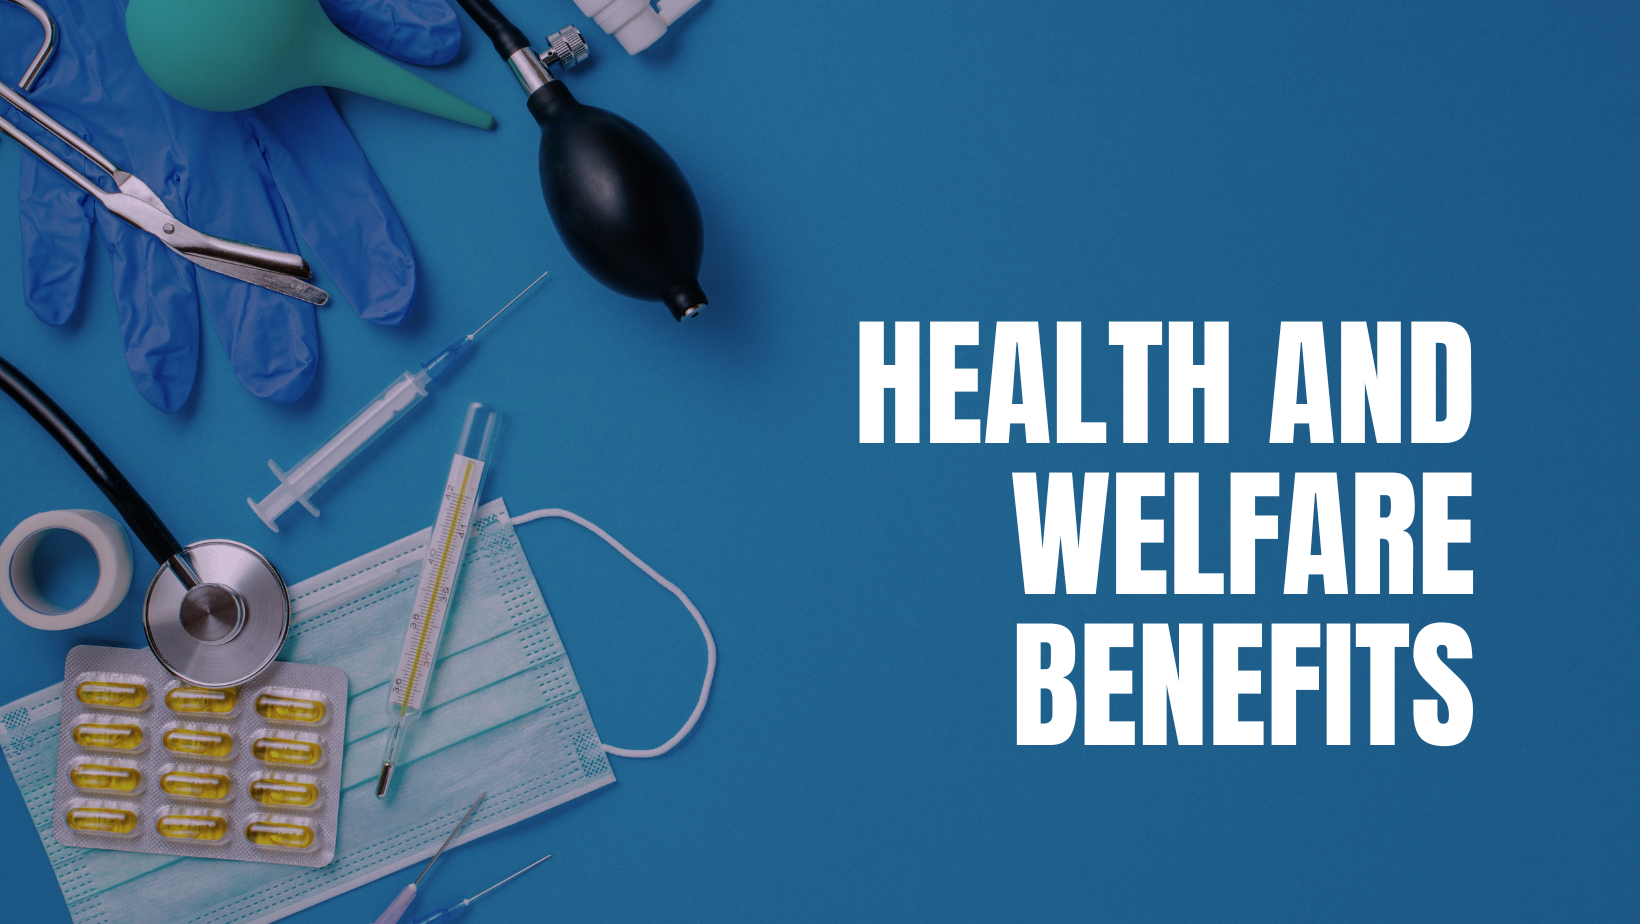 Health and Welfare Benefits Banner; pills, thermometer, stethascope, face mask, blood pressure monitor